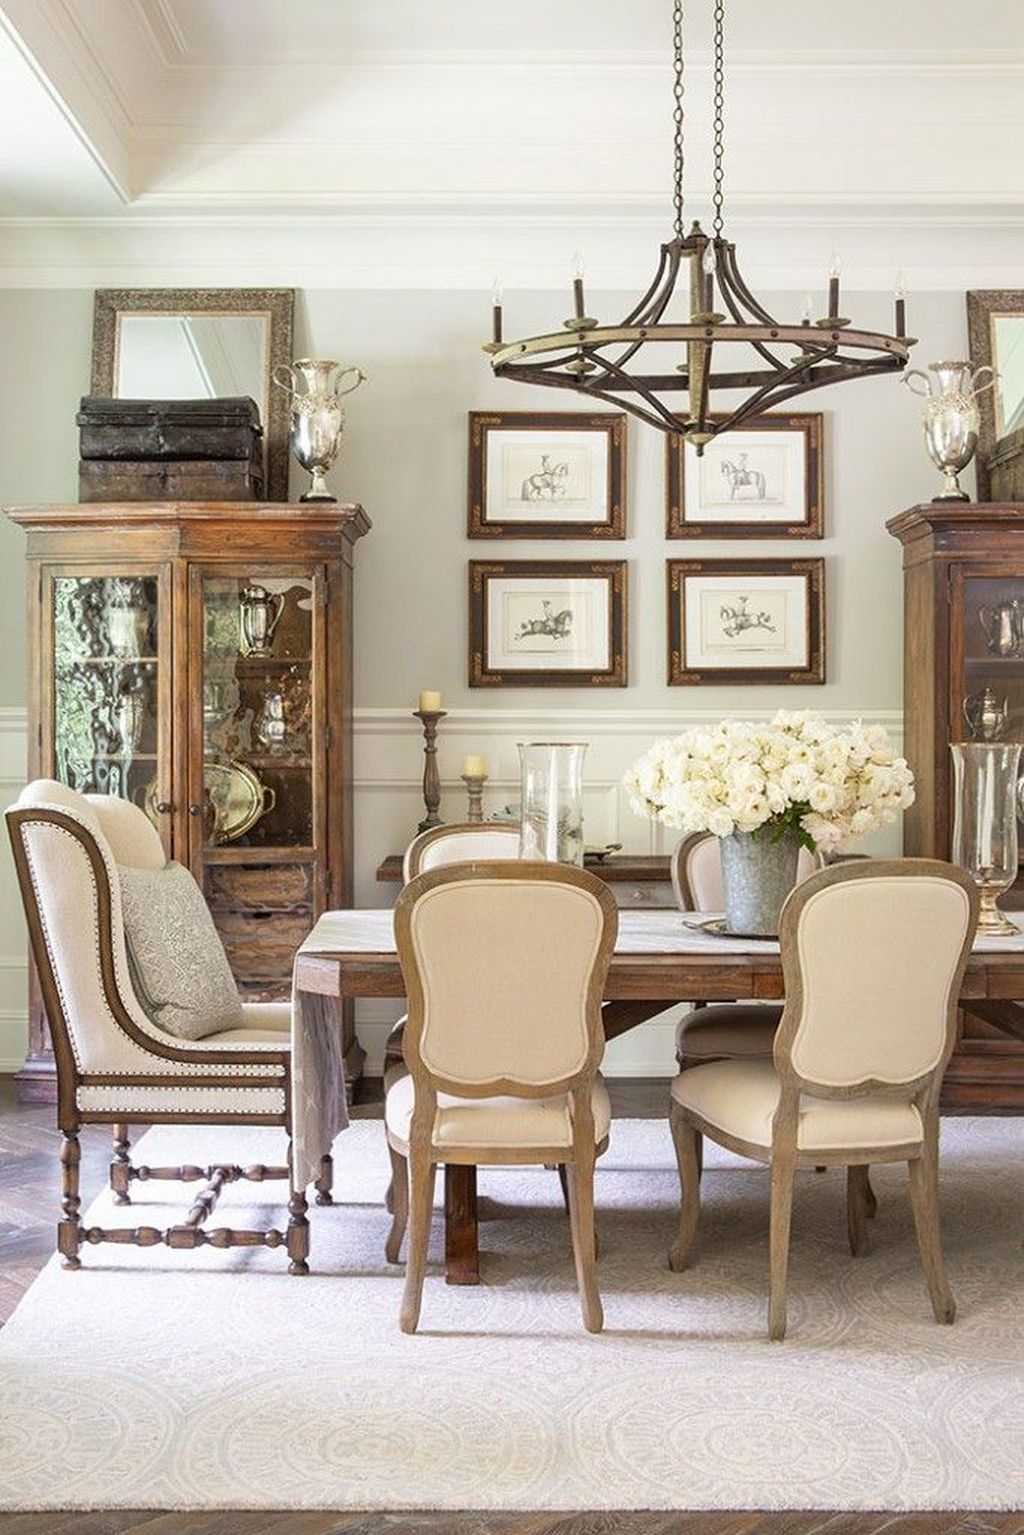 The Best Lighting Dining Room Design Ideas You Need To Try 10 - SWEETYHOMEE